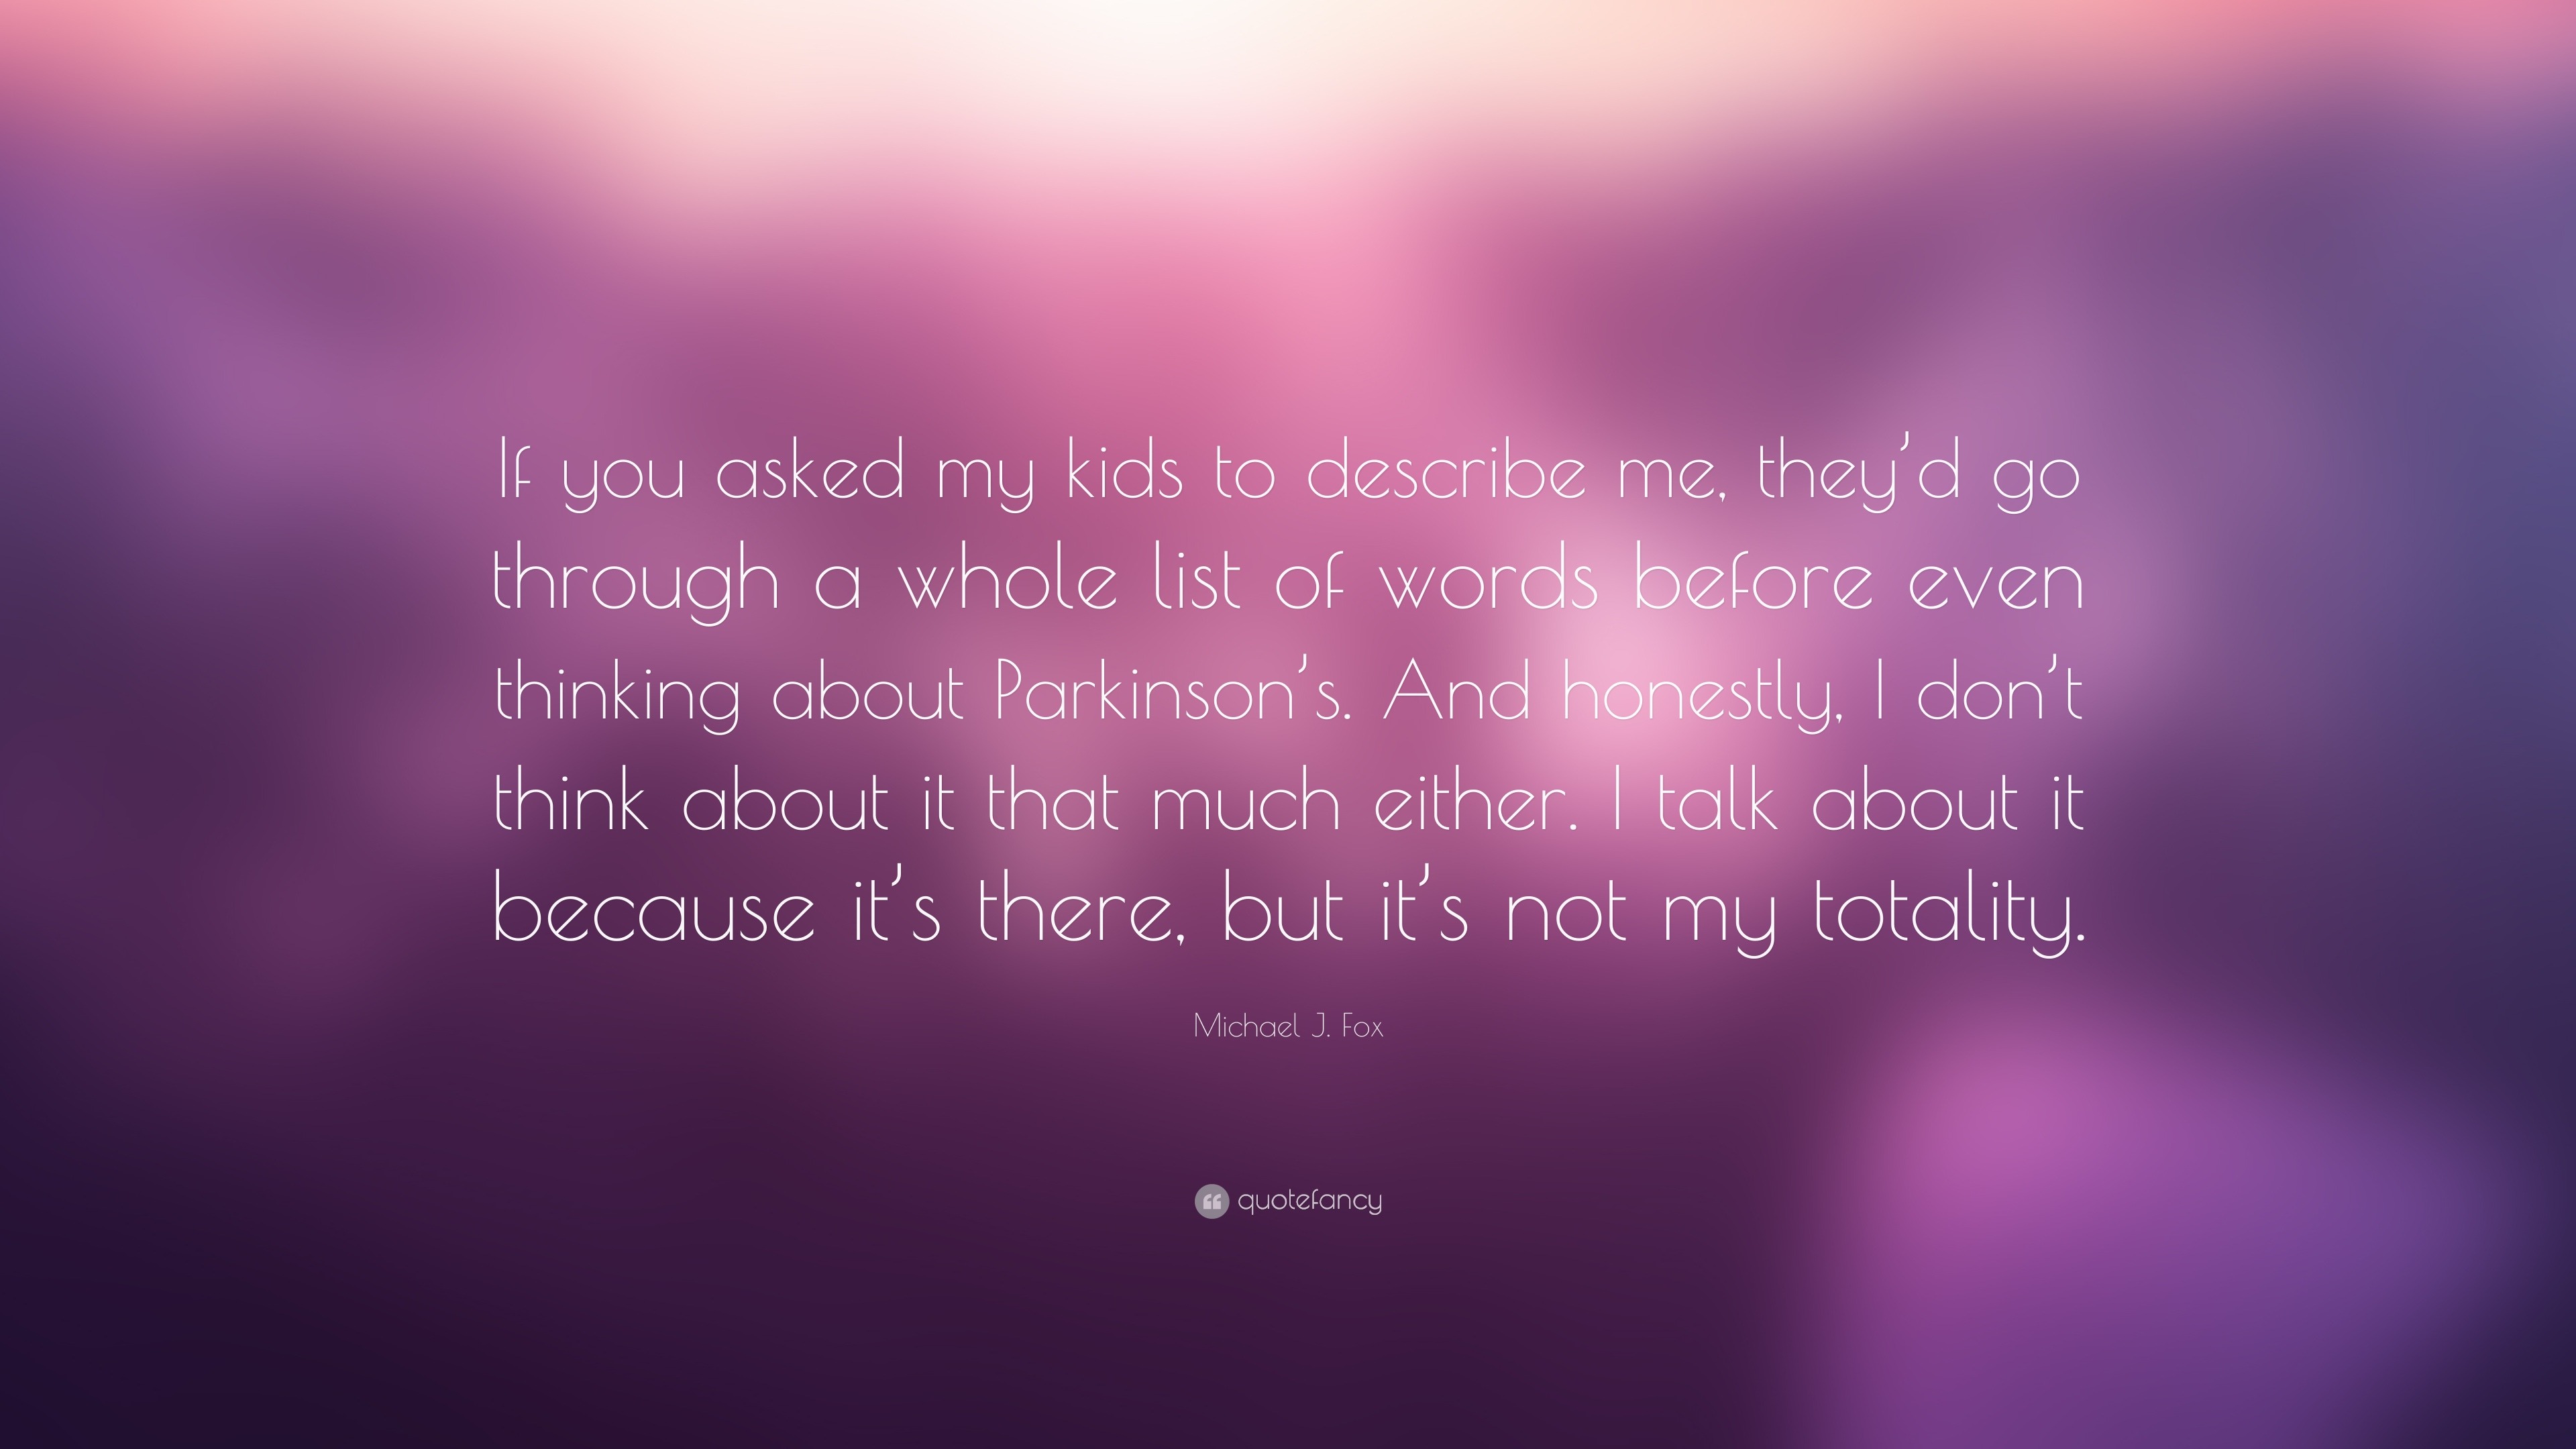 Michael J. Fox Quote: “If you asked my kids to describe me, they’d go ...